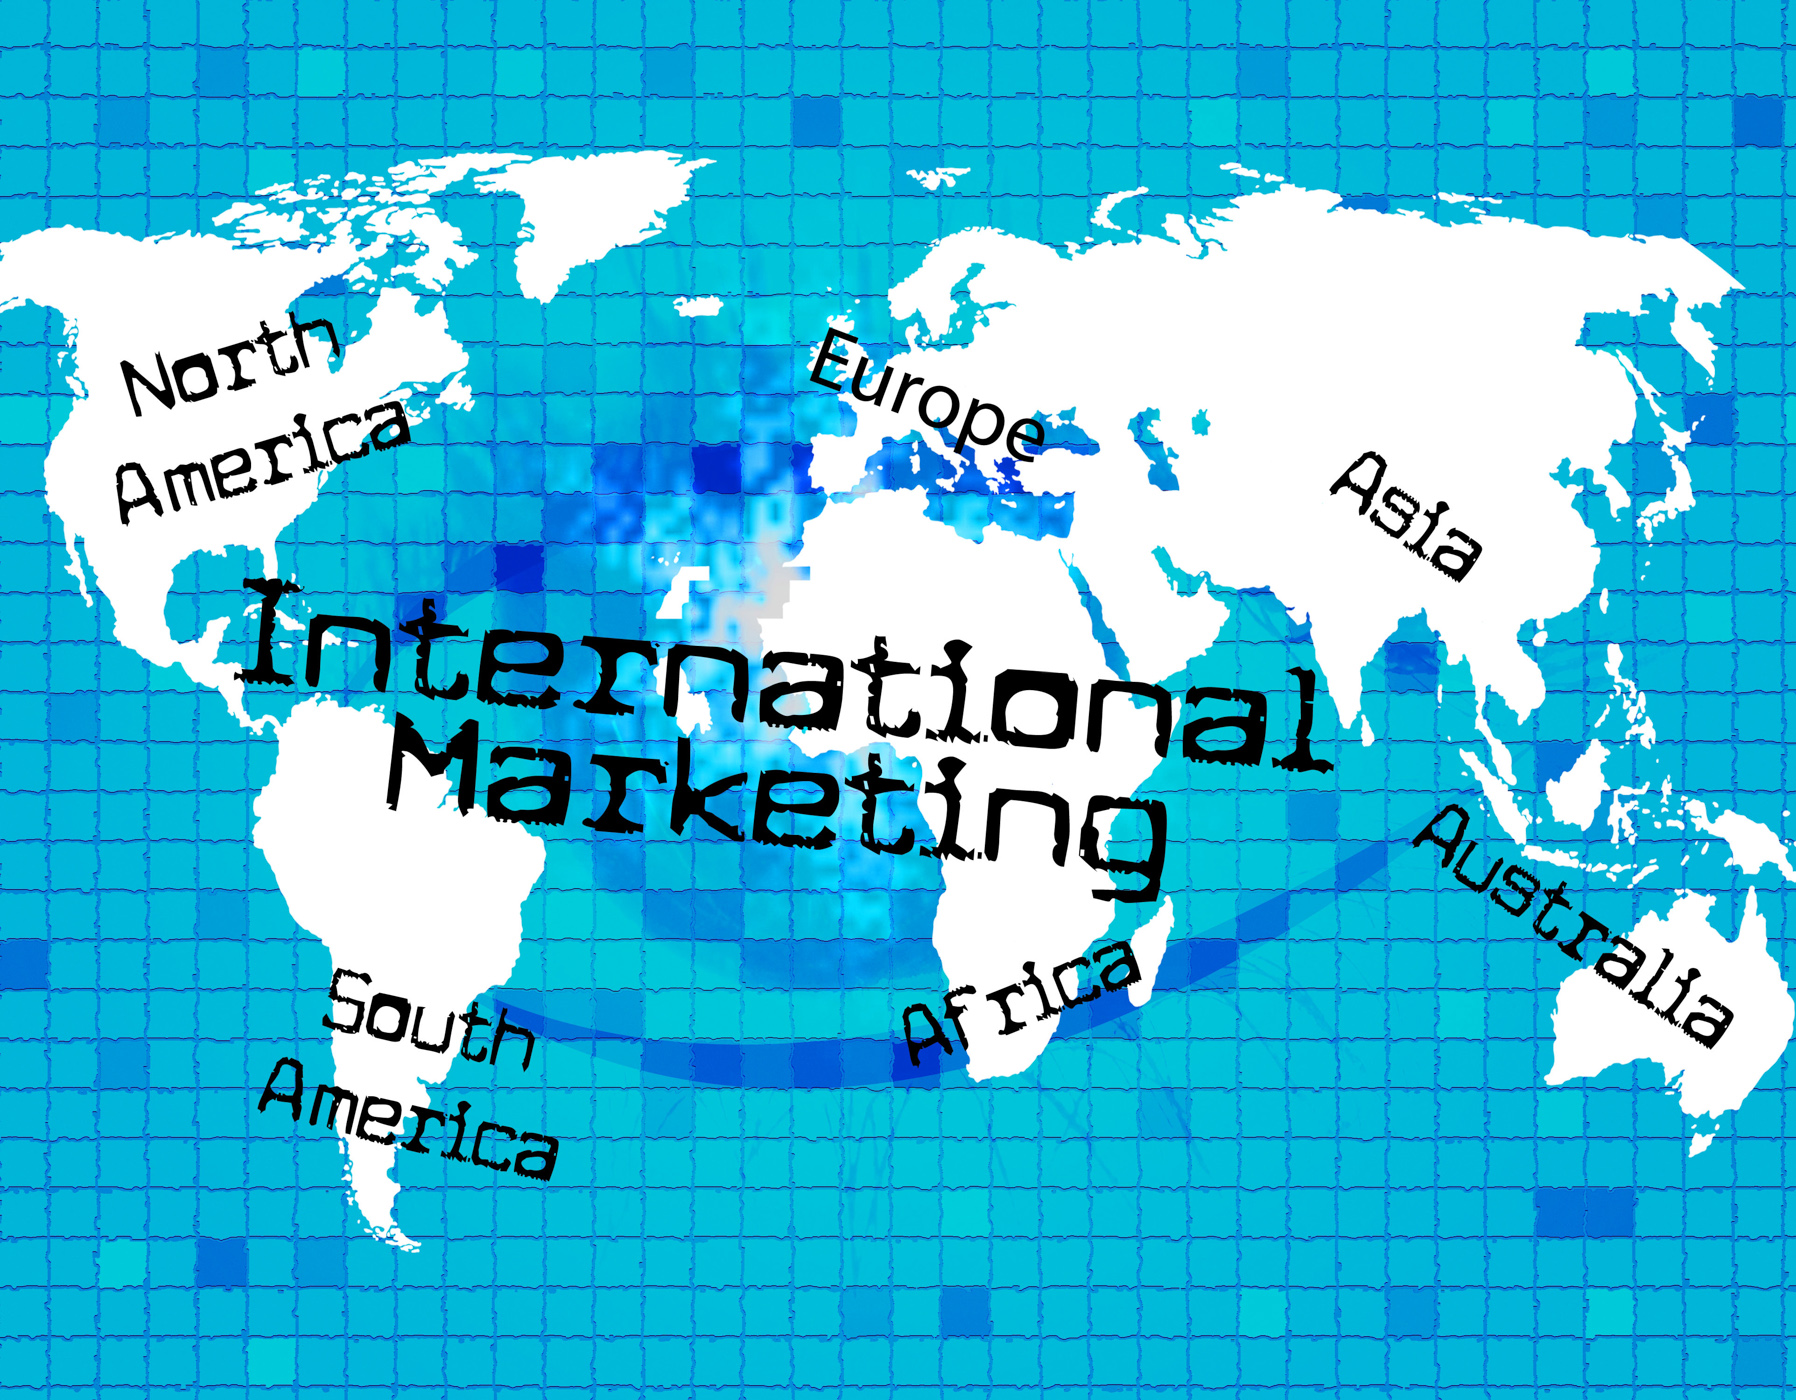 Marketing international means across the globe and world photo